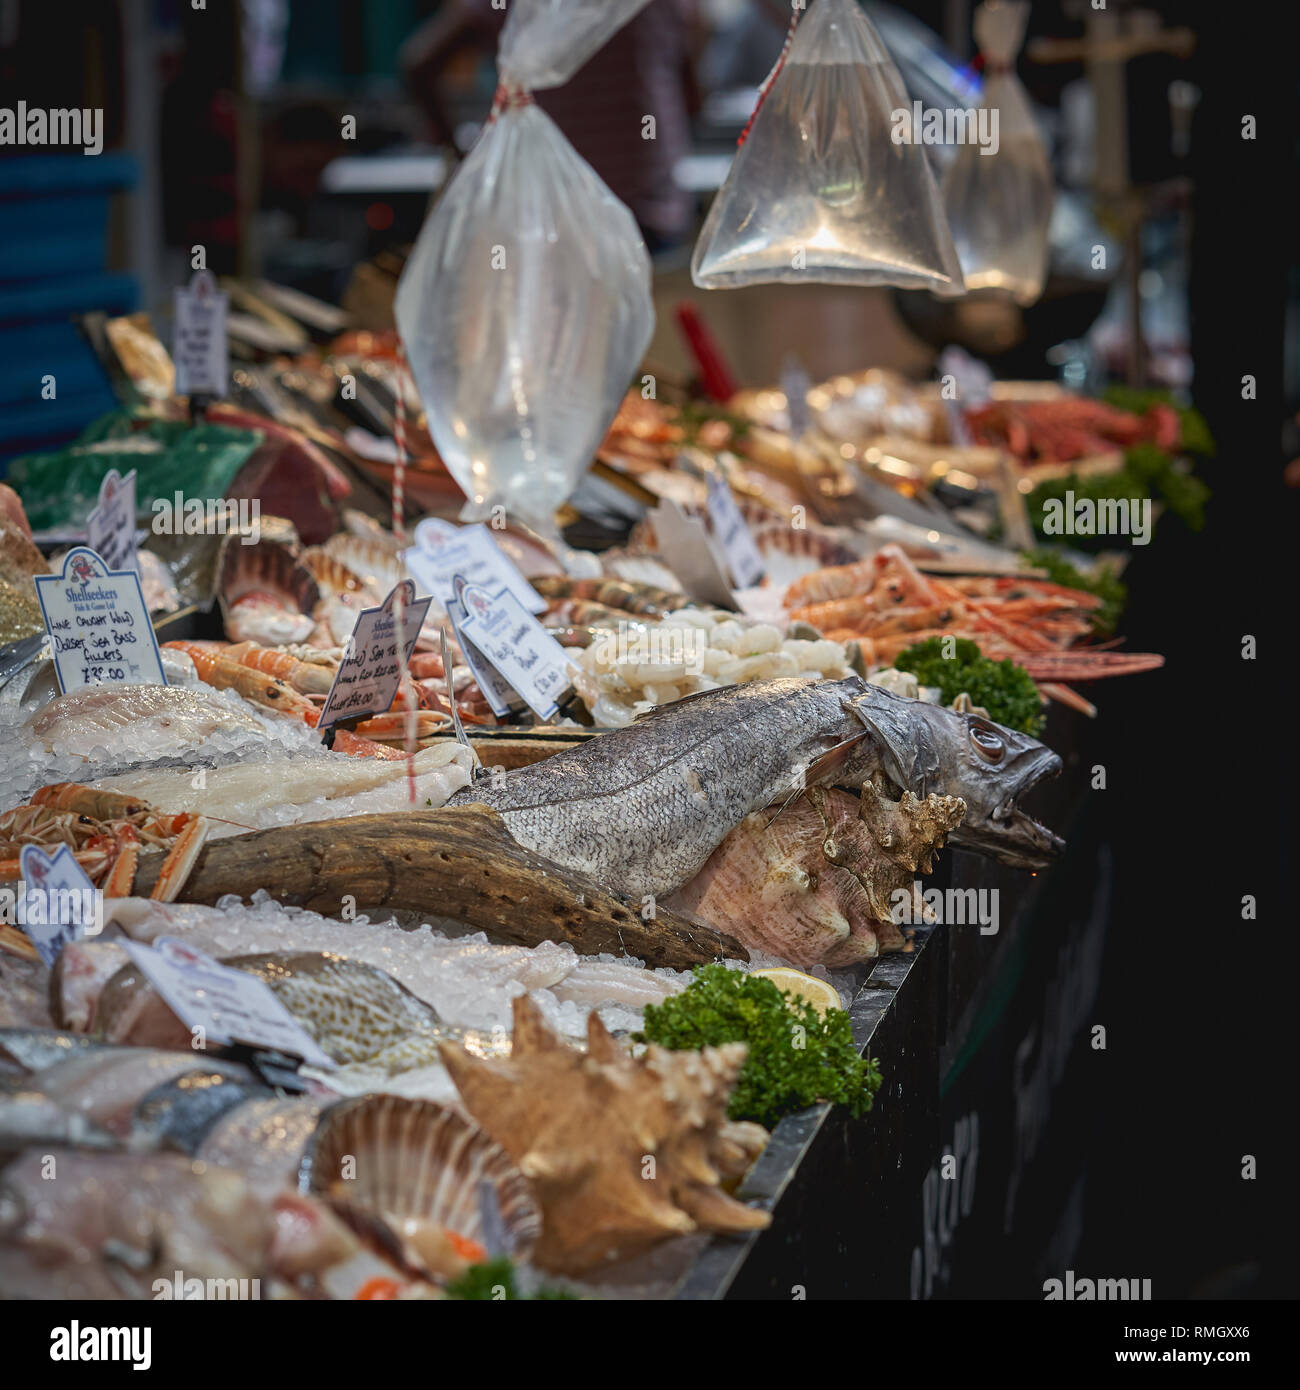 London, UK - June, 2018. Variety of fishes and shellfishes on sale at a fishmonger stall in Borough market. Stock Photo